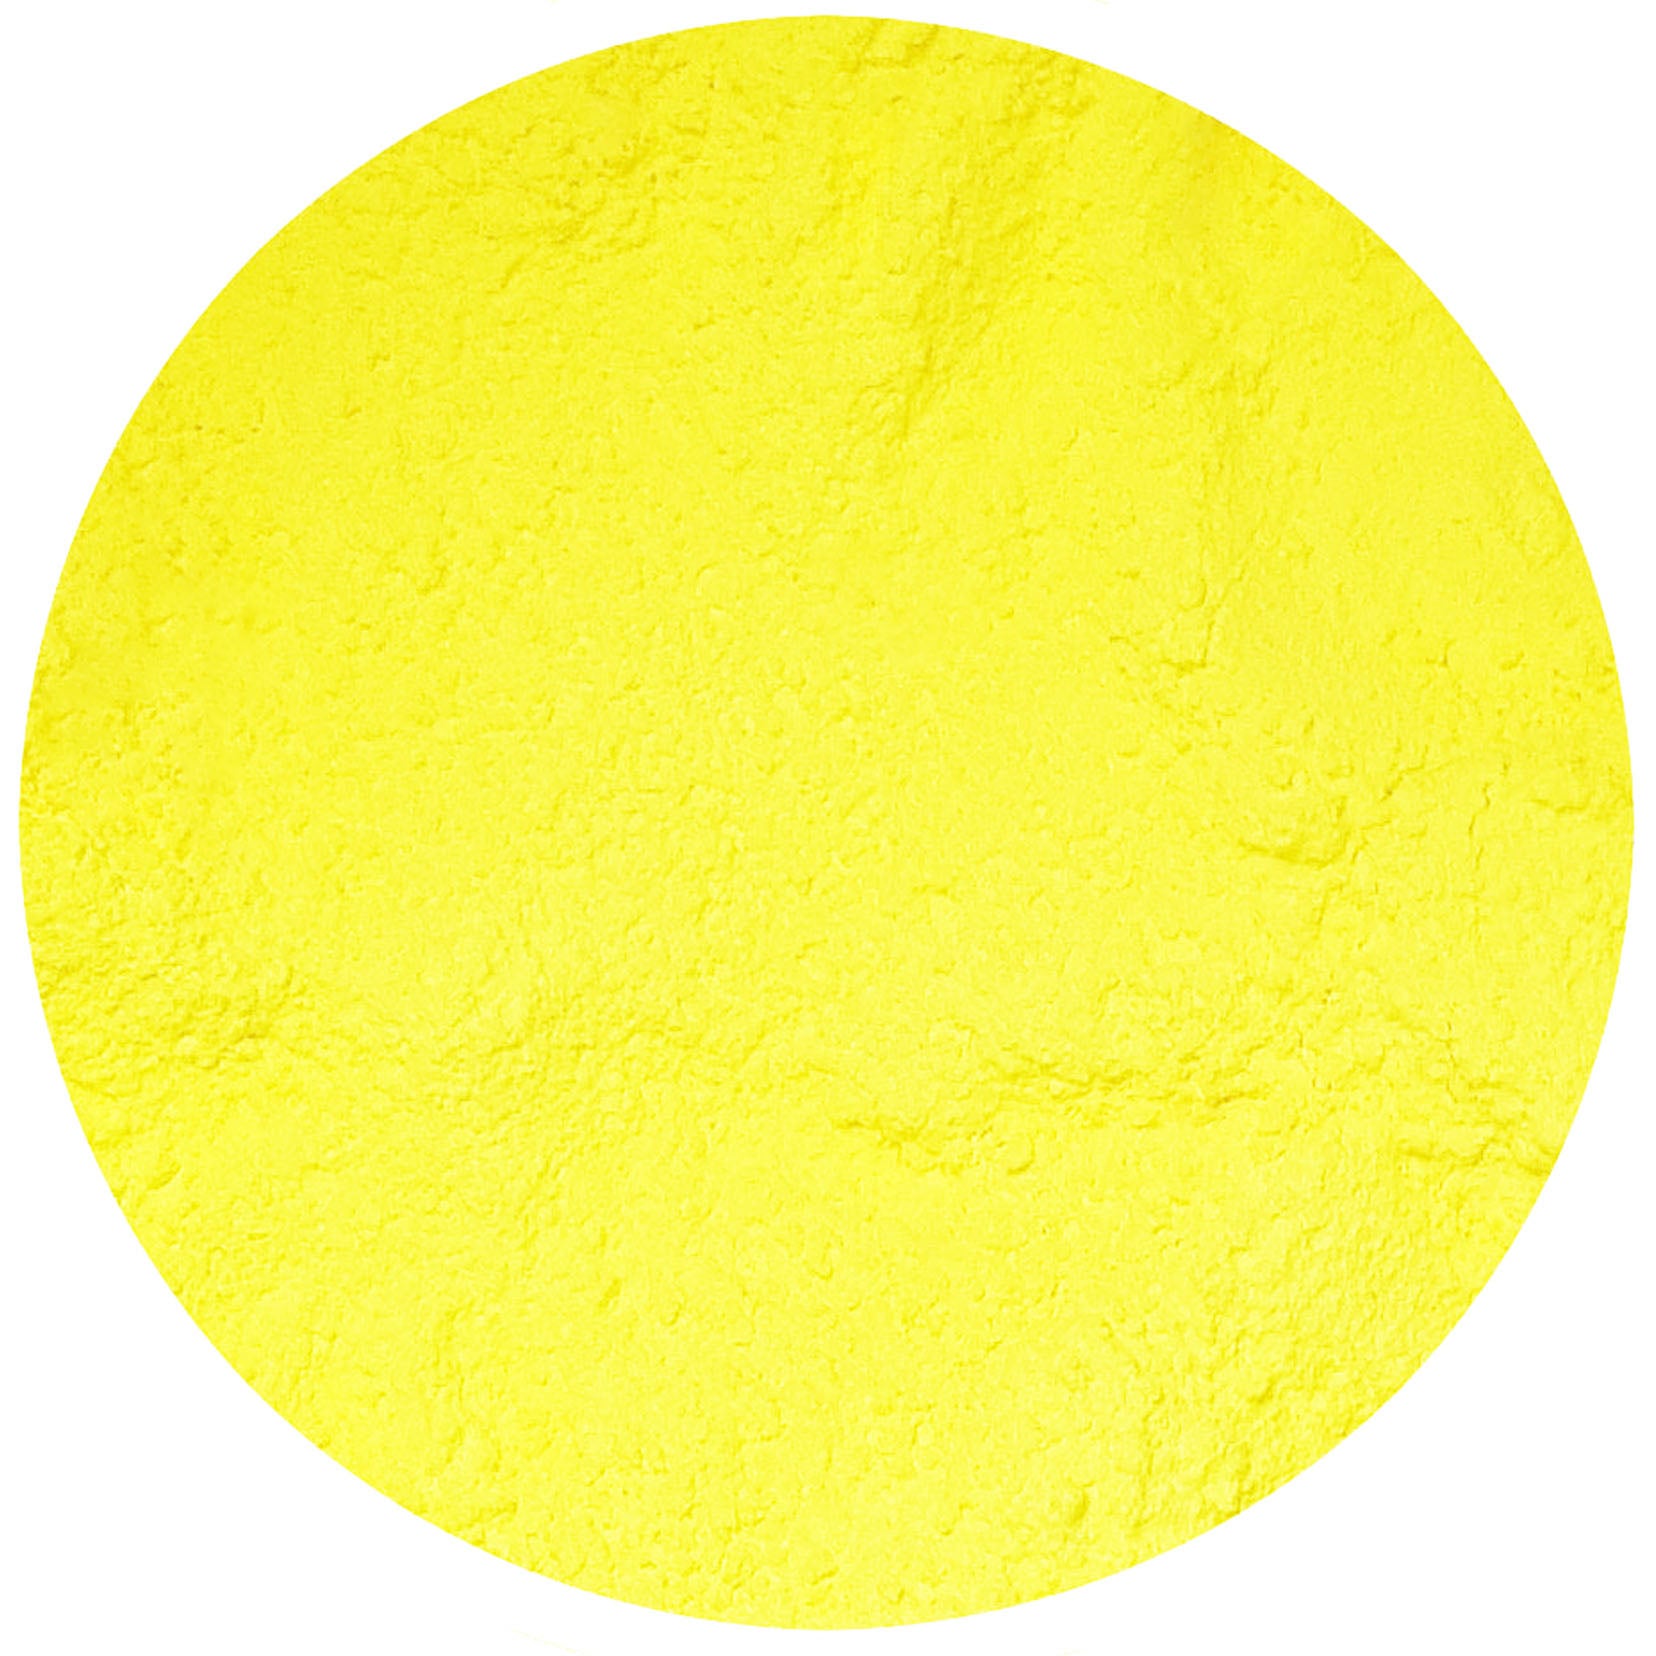 Neon Yellow | Fluorescent Pigment Dye | Candles, Wax Melt, Cosmetics, Bath Bombs, Shower Gel | Truly Personal